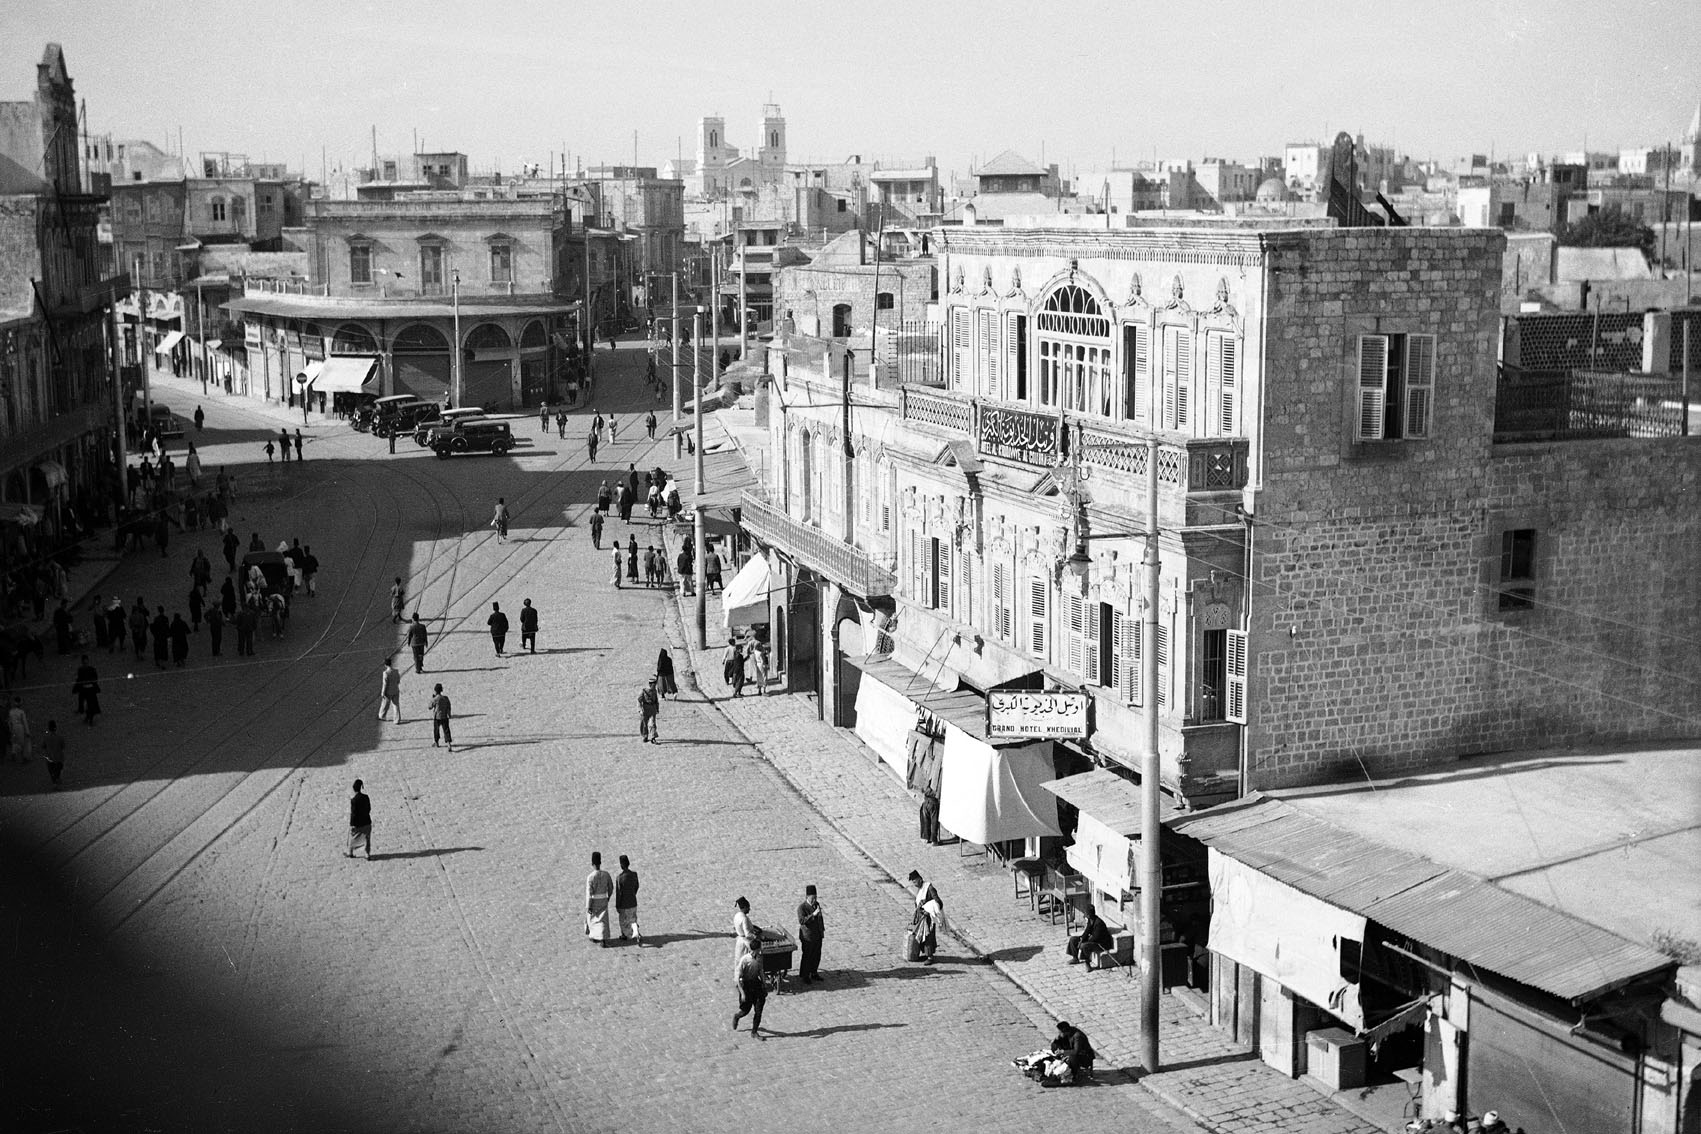 Section of public square known as Bab al-Faraj seen in 1937, part of the surrounding fabric of the gate demolished in 1904